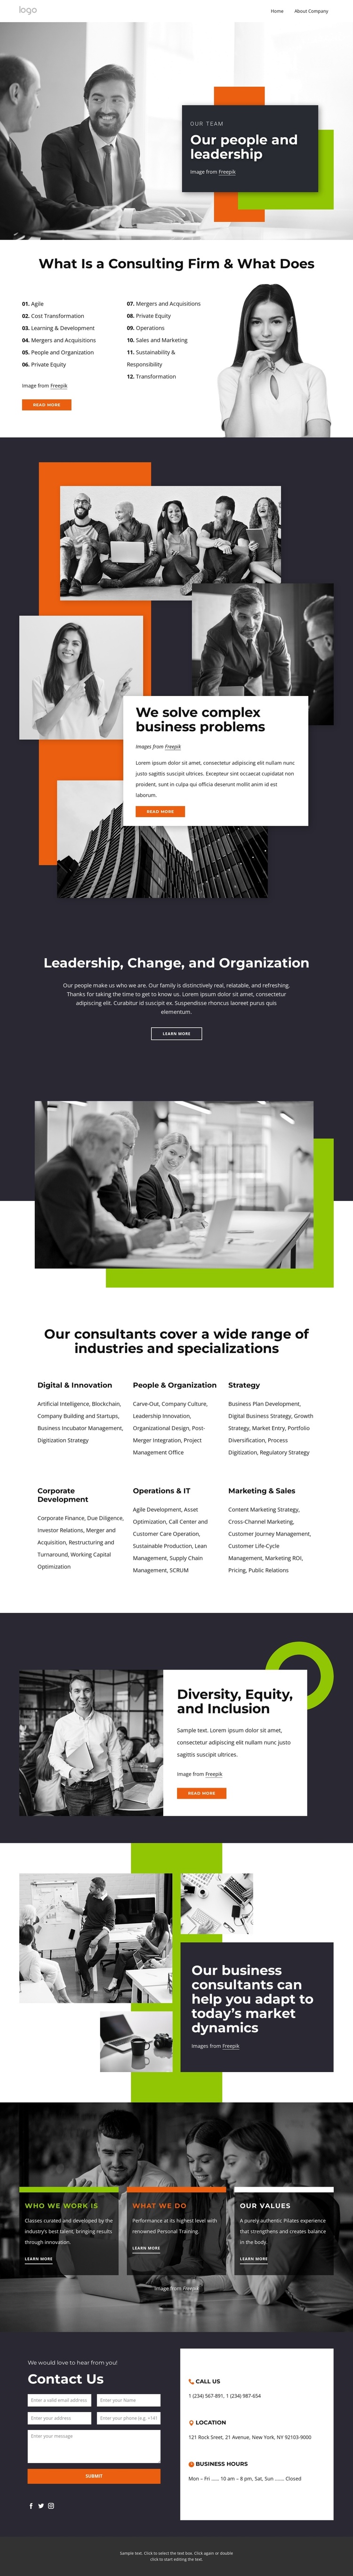 Our people, partners and leadership Joomla Template